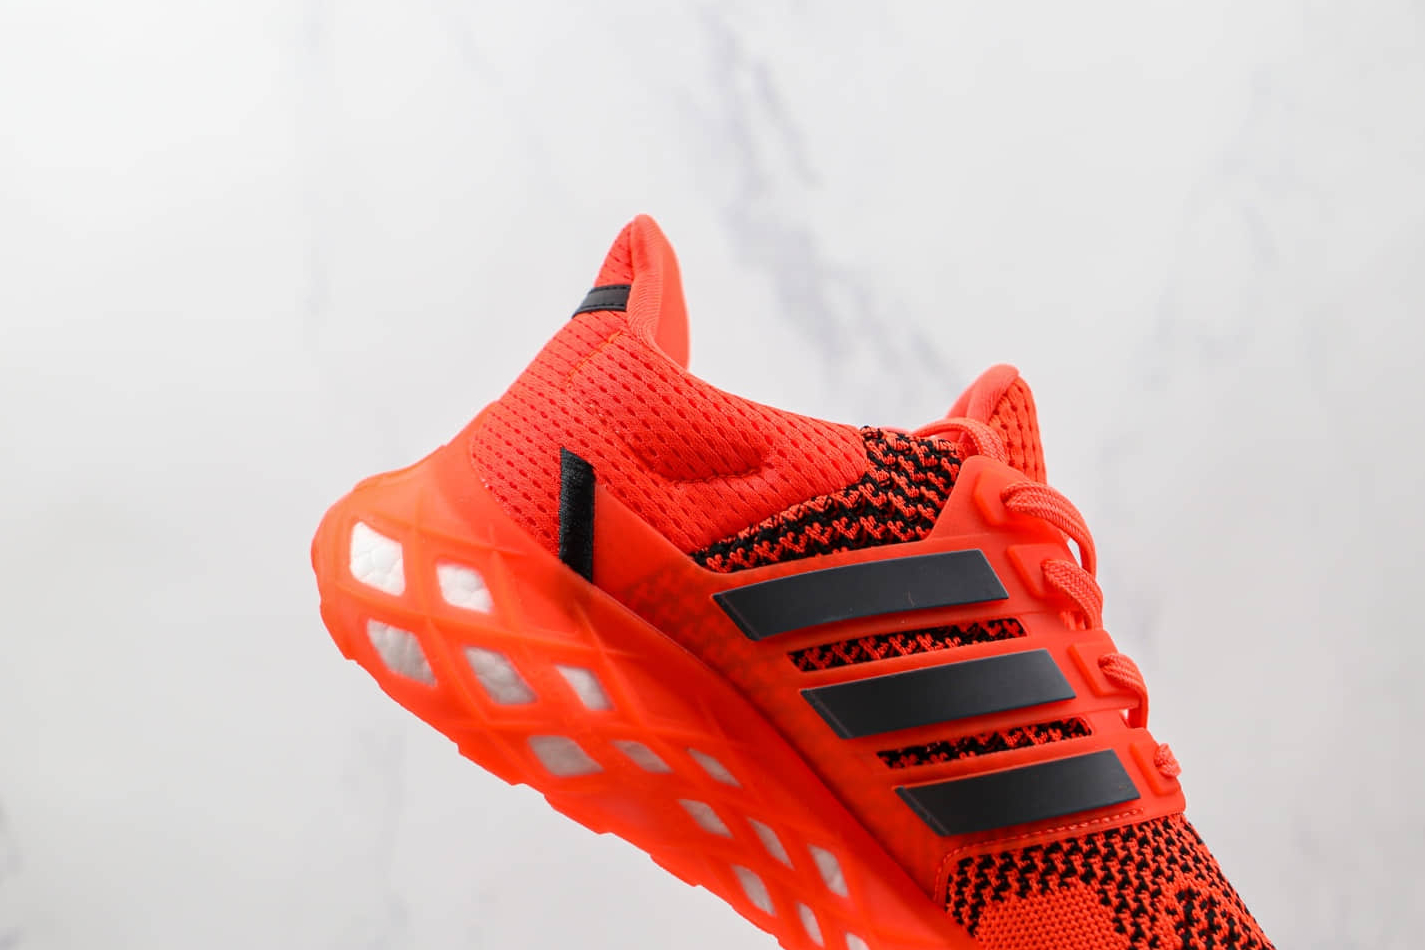 Adidas Ultraboost Web DNA Solar Red | GY4171 | Limited Edition